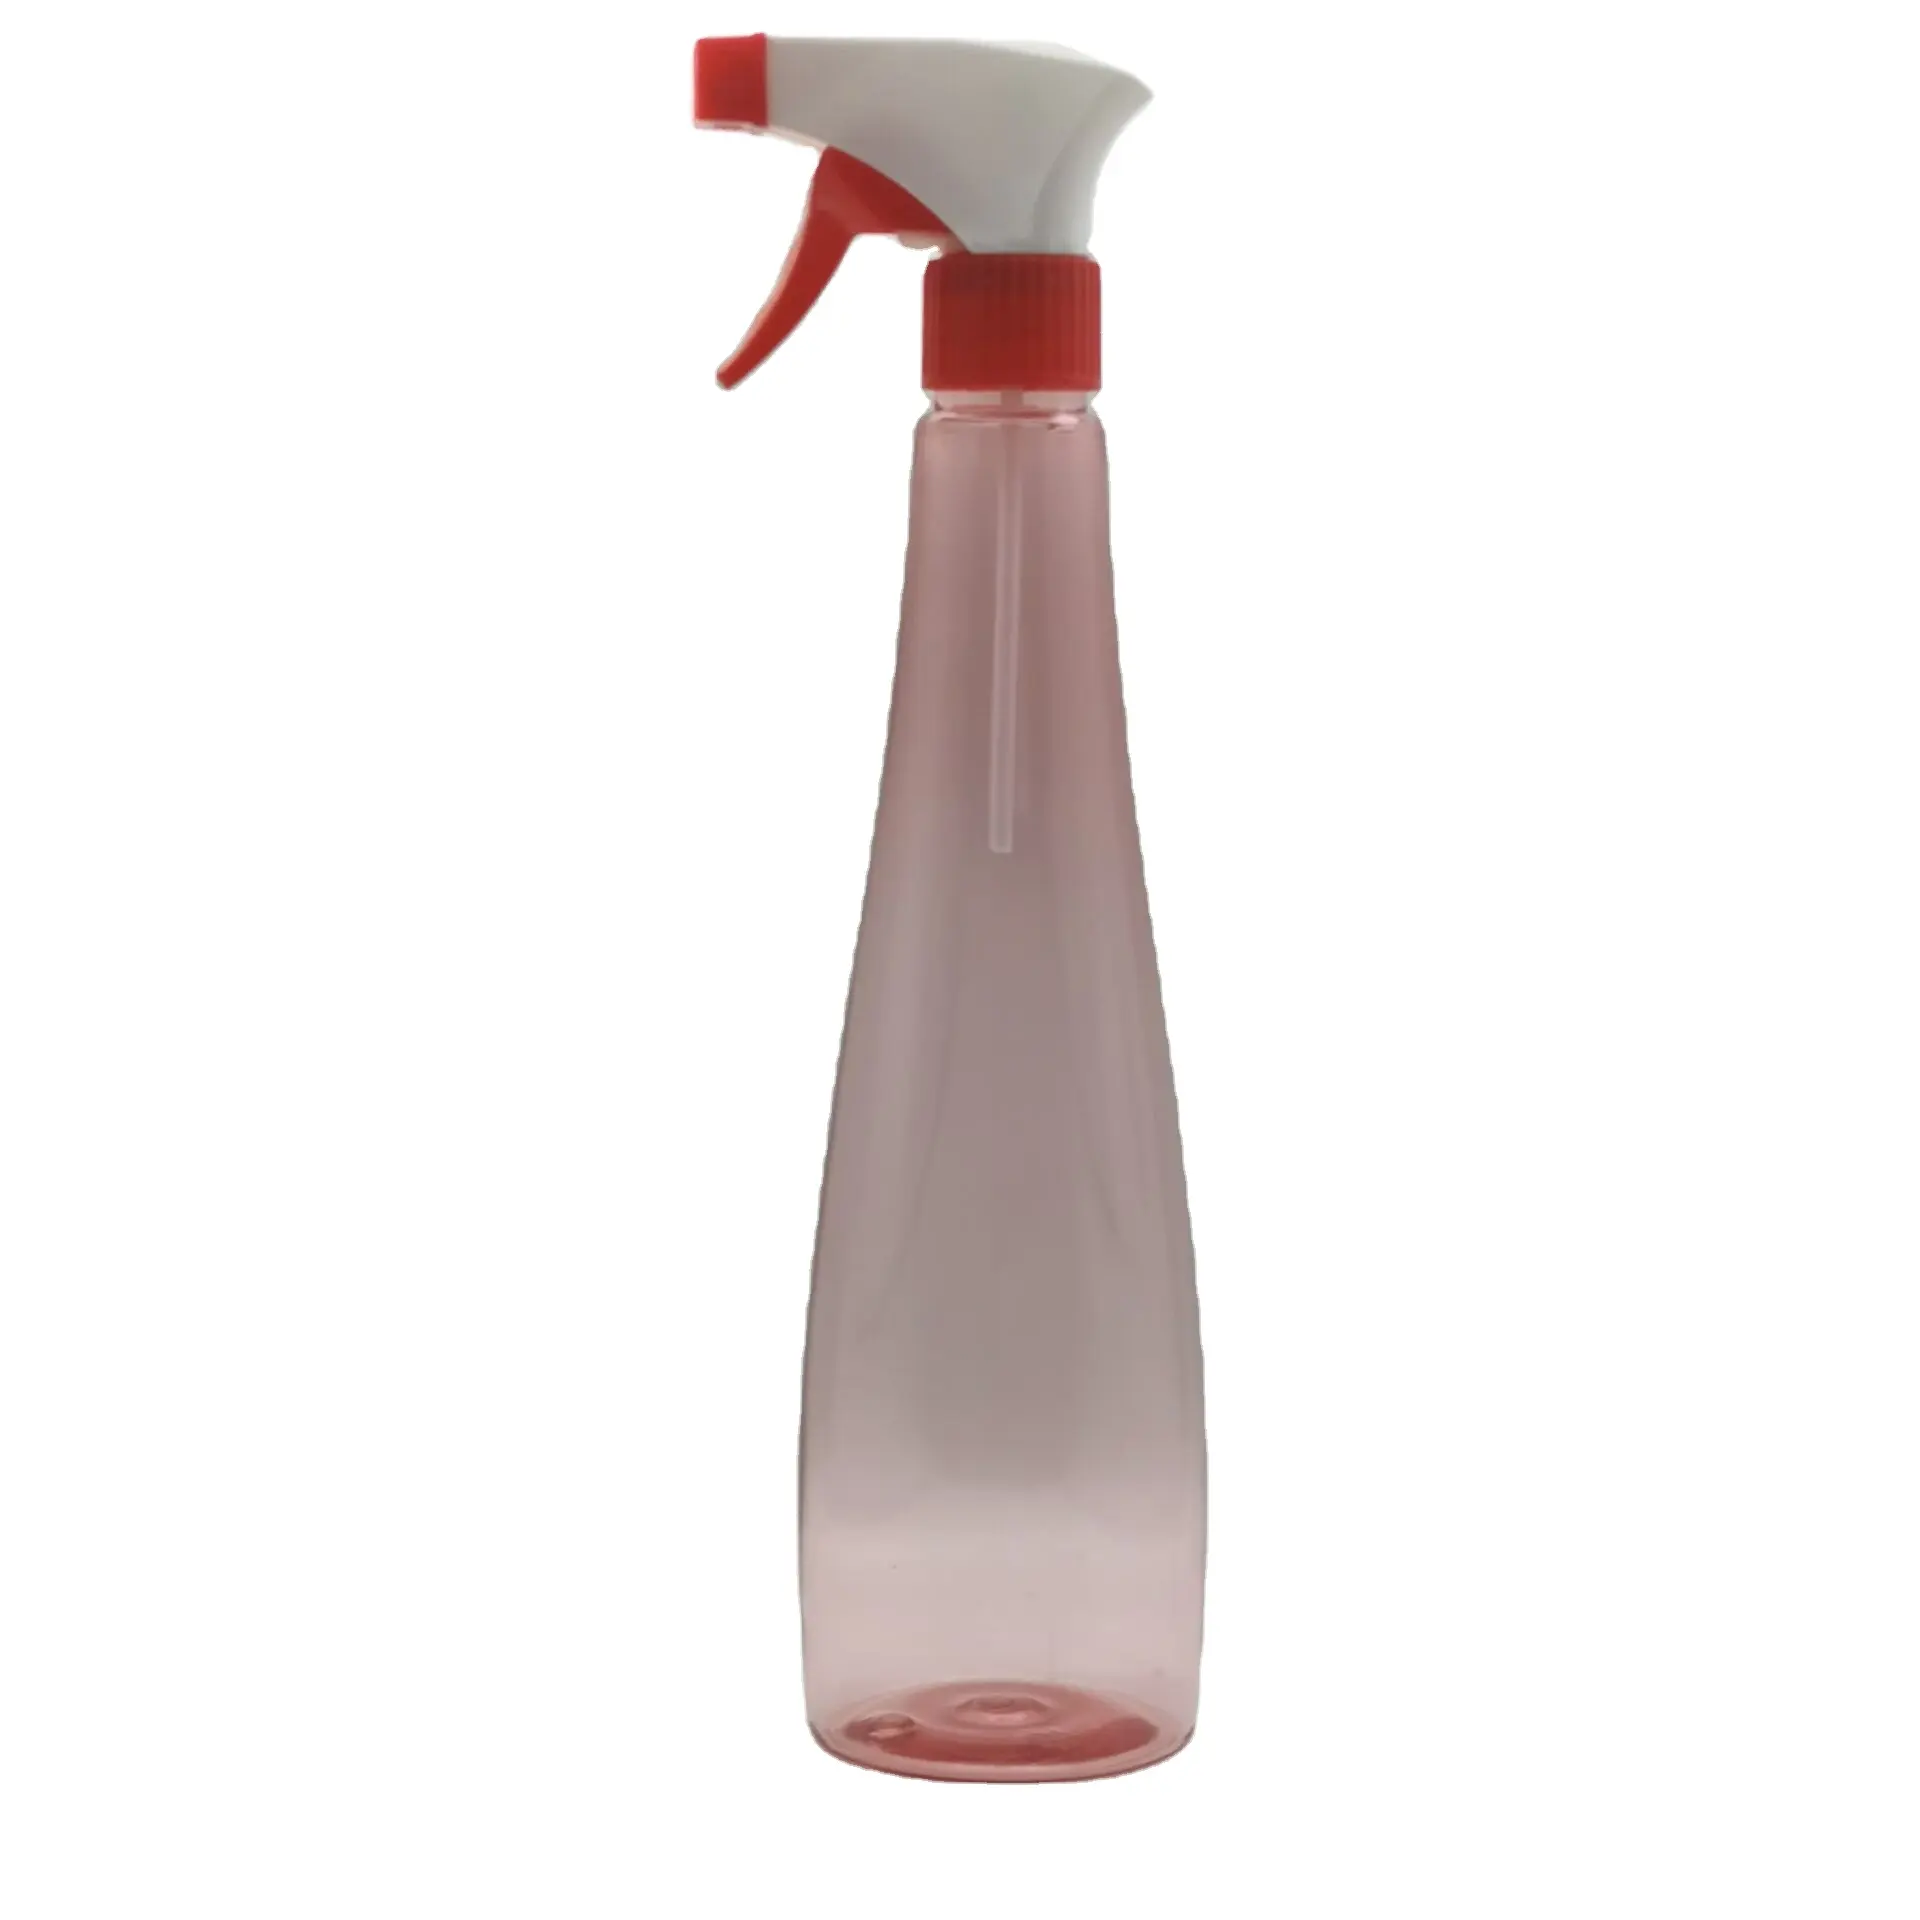 16oz Red PET Slim PET Plastic Bottle With Red Trigger Sprayer for Shampoo for Cosmetic Packaging